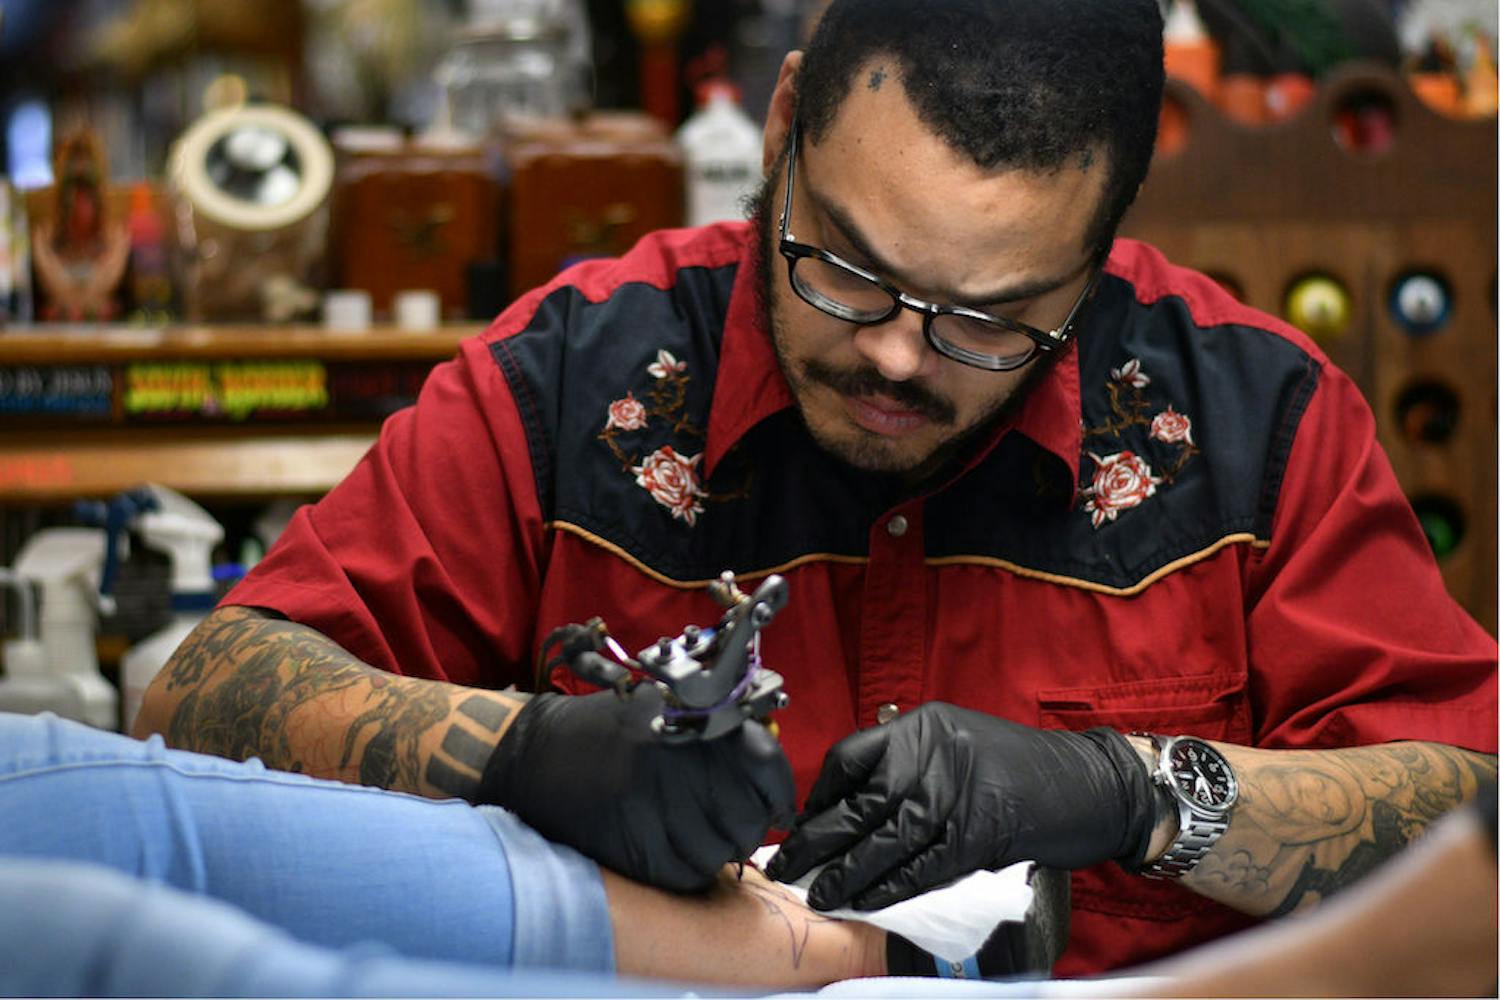 Jesus Lopez, a 30-year-old tattoo artist at Death or Glory, outlines a shark tattoo Saturday afternoon during Death or Glory’s tattoo benefit fundraiser. All money made from the event will go towards treatment for Nicole Hall’s breast cancer. Hall is a frequent customer at Death or Glory, and over 200 people attended the benefit.